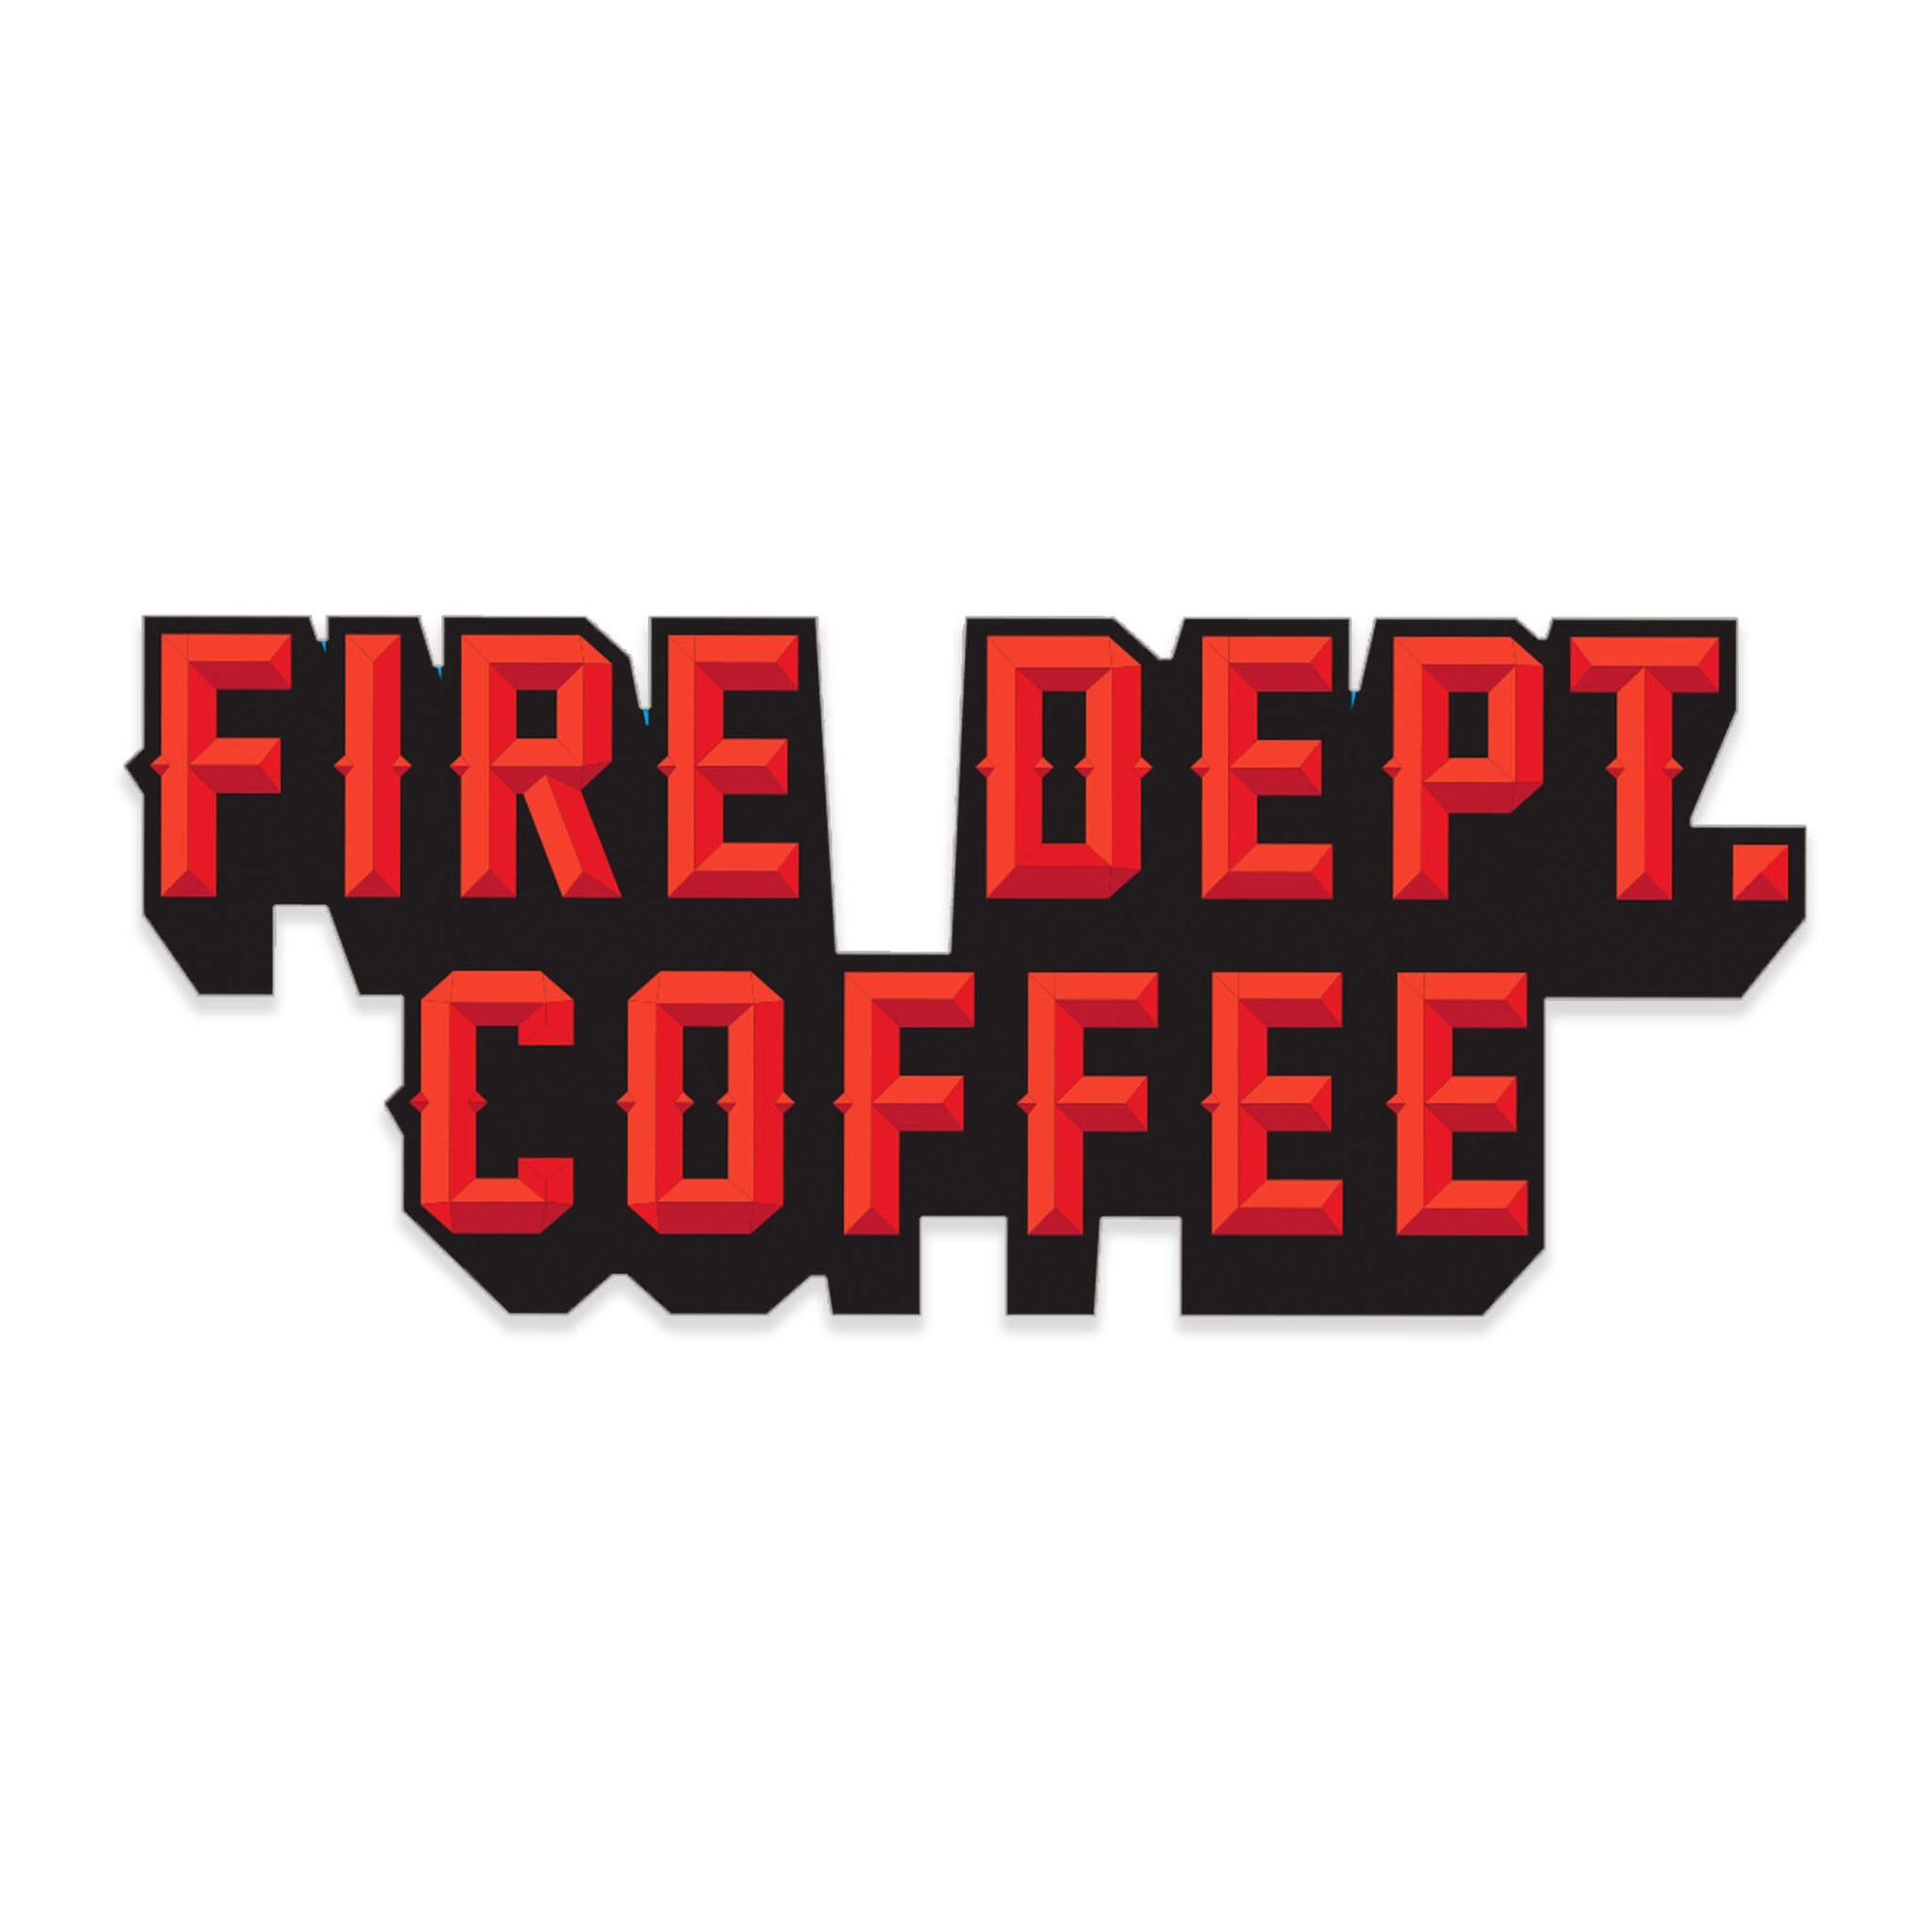 Sticker with "Fire Dept. Coffee" on it in red, 3D lettering